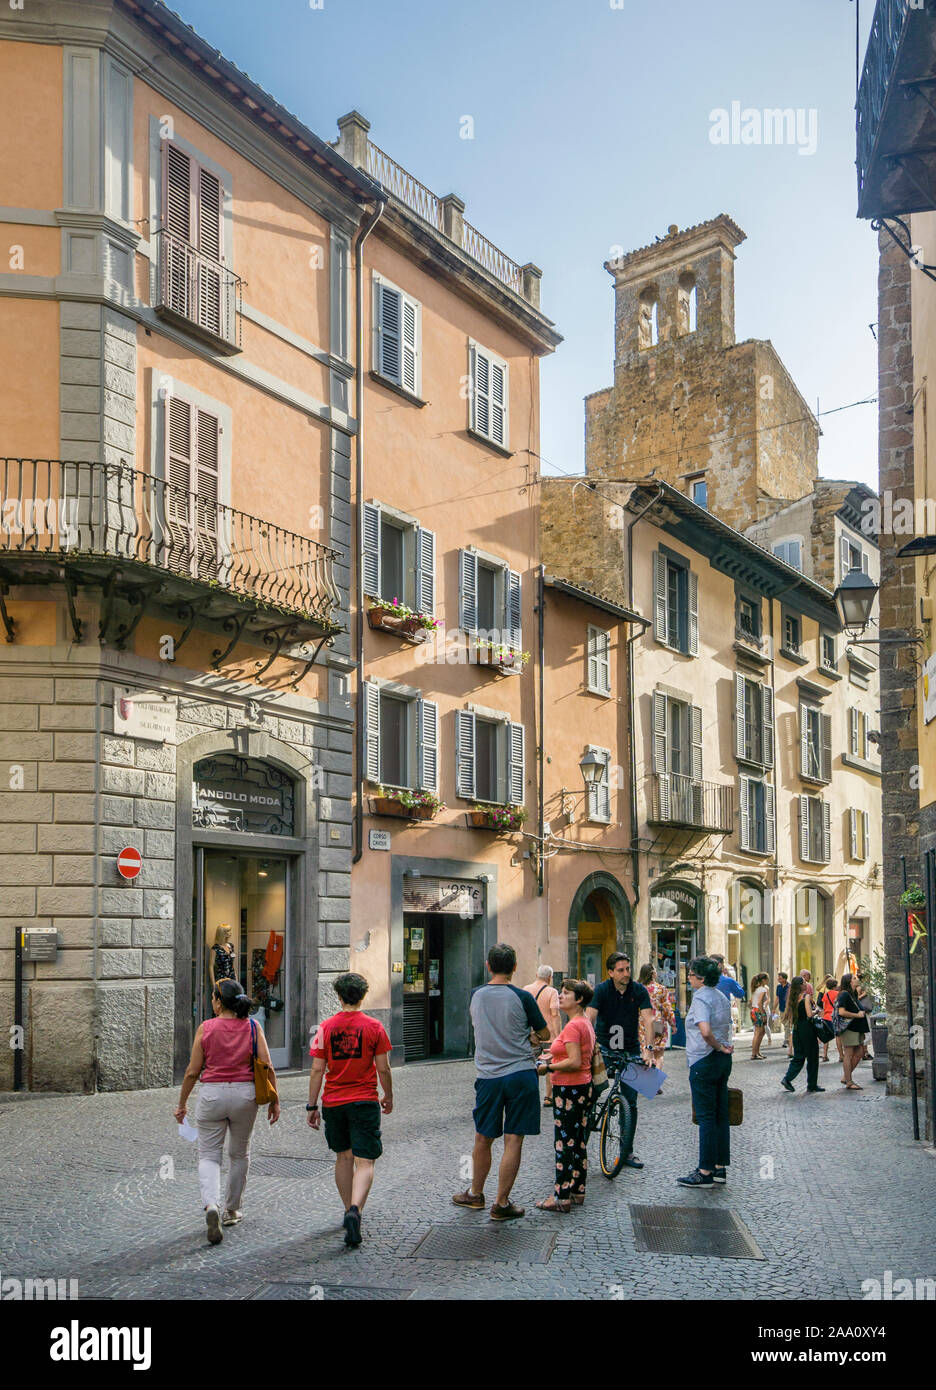 Corso Cavour, main street in the medieval hilltop town of Orvieto, Umbria, Italy Stock Photo